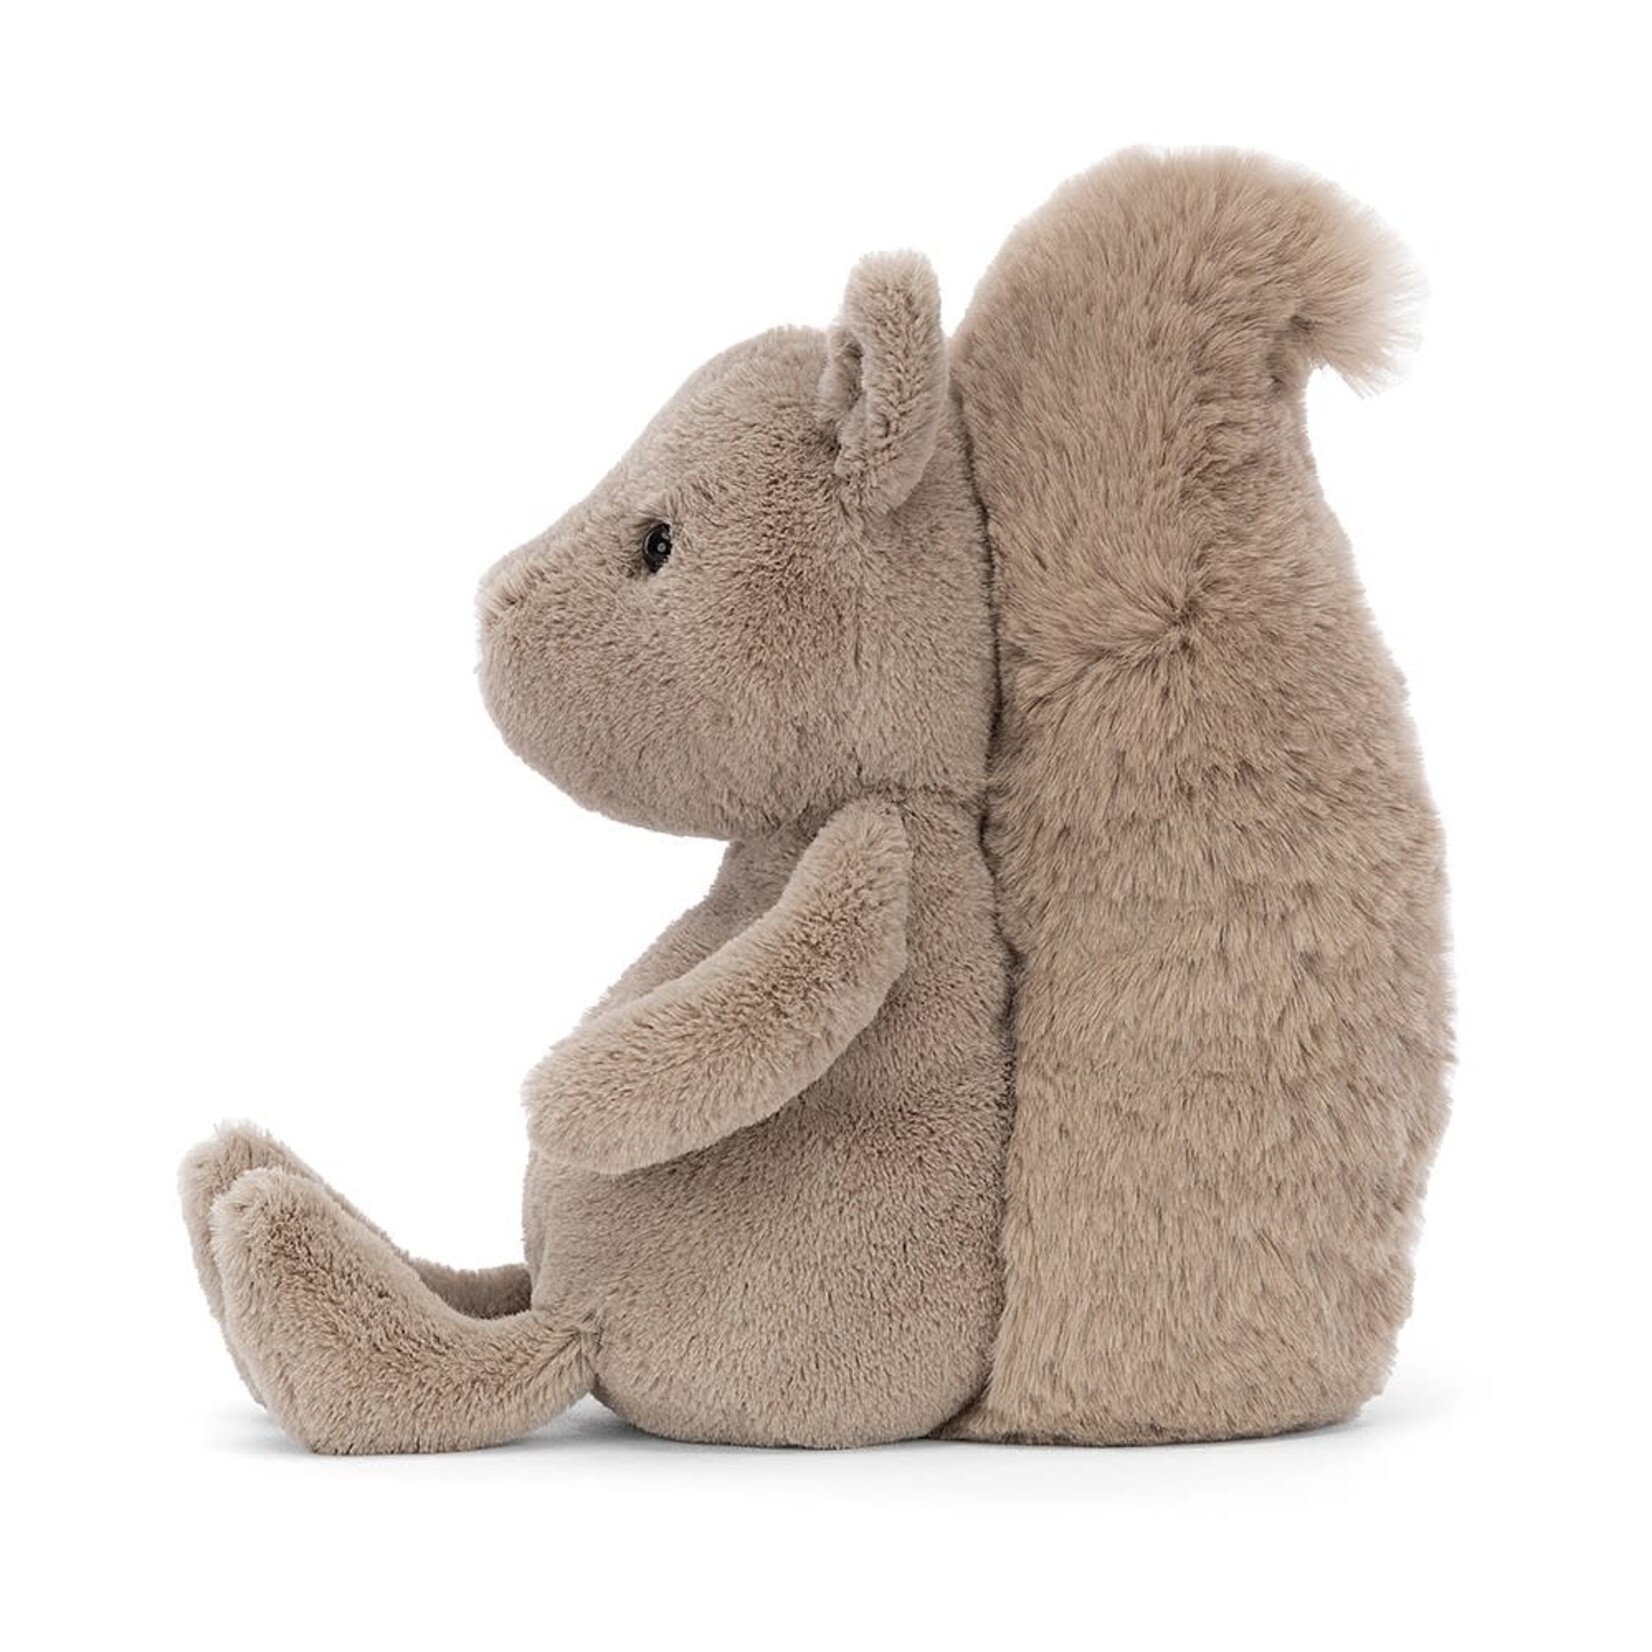 Jellycat Jellycat Willow Squirrel